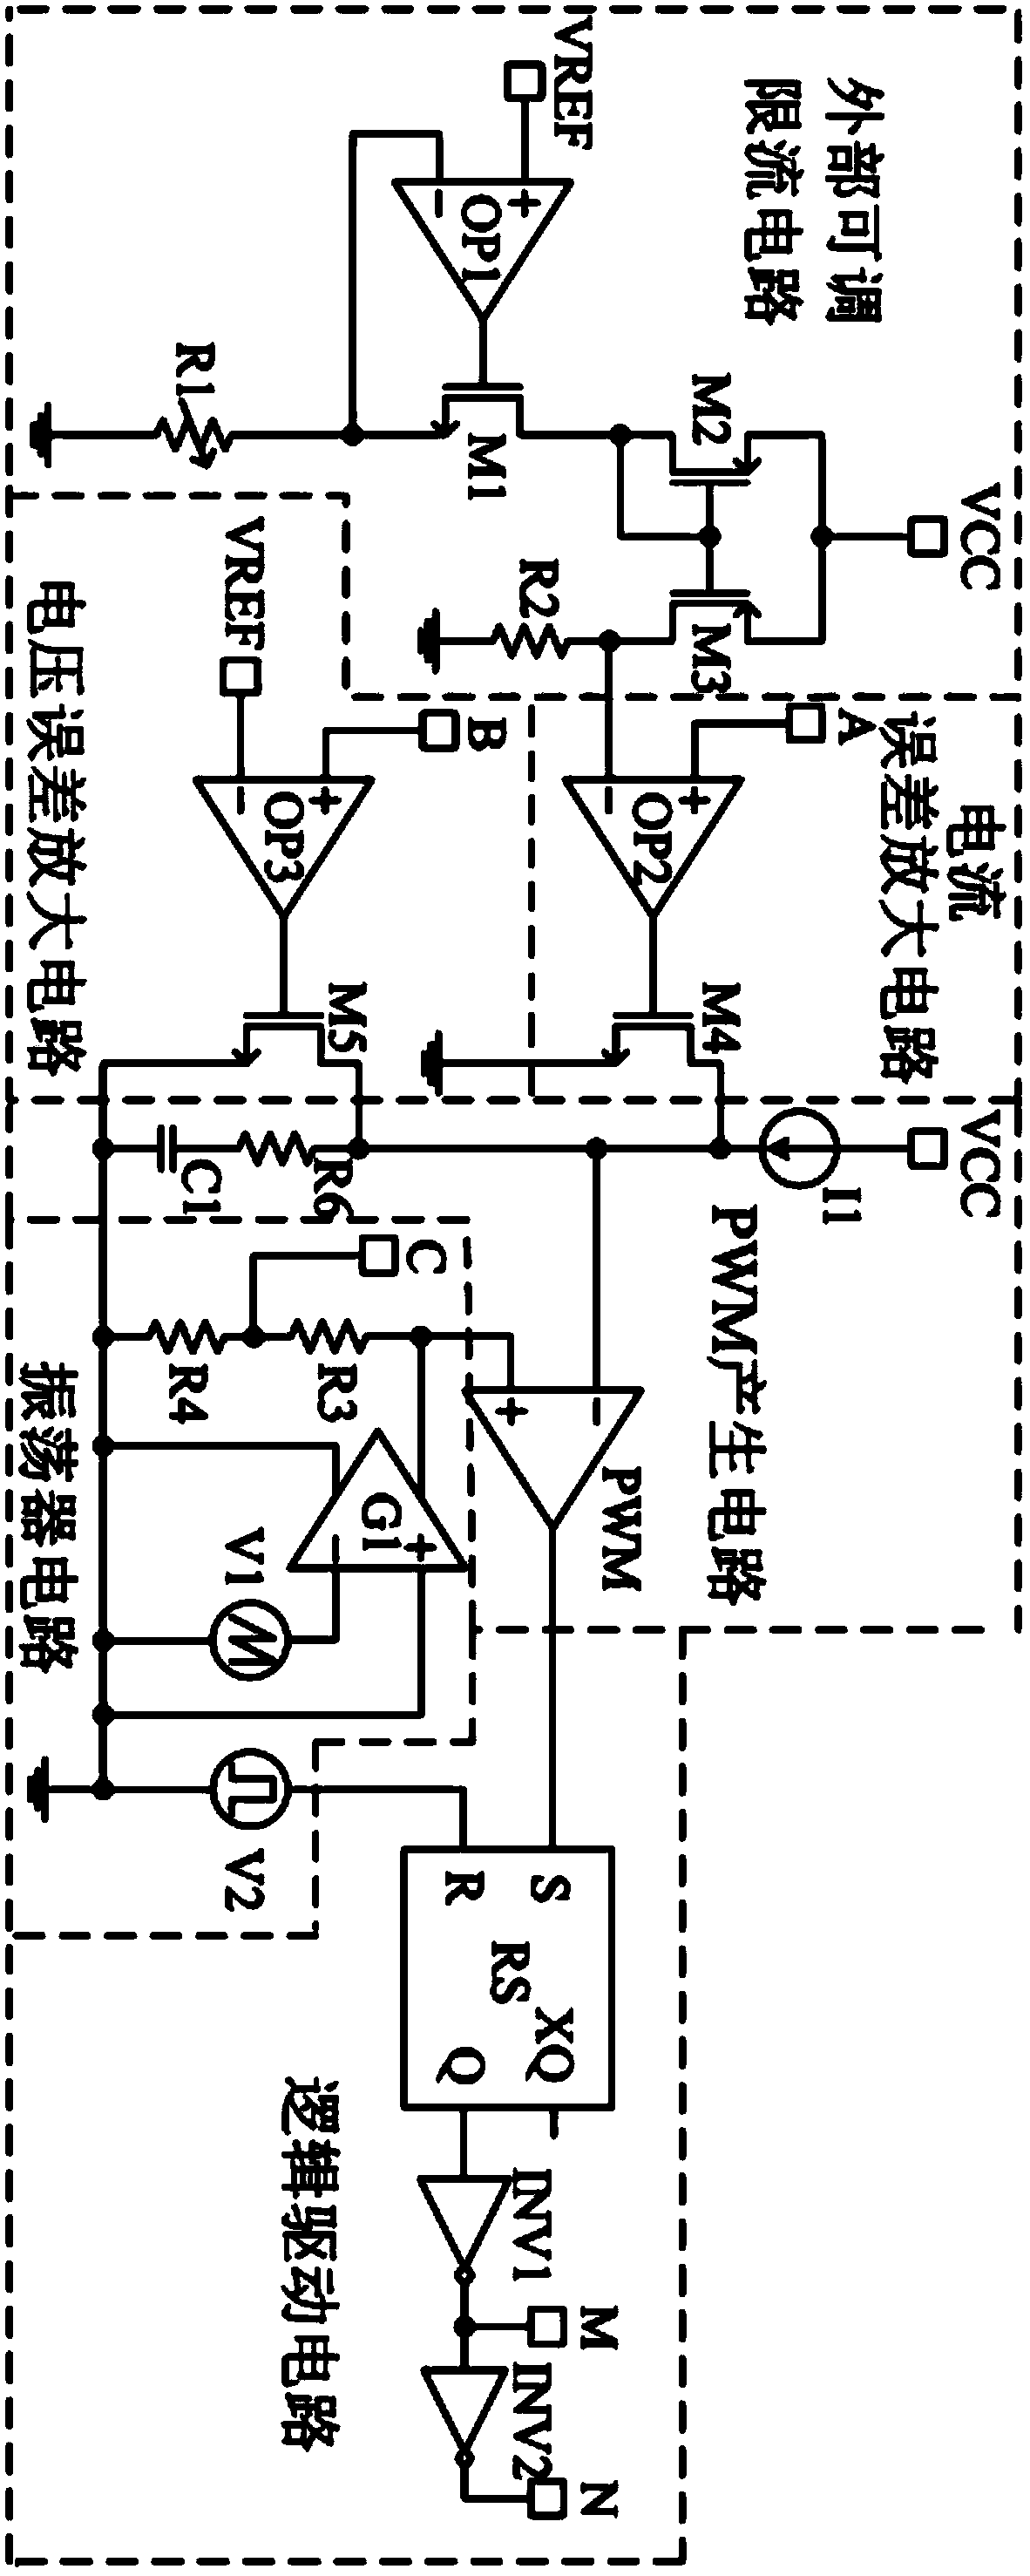 Constant-current/constant-voltage DC-DC conversion system with external adjustable current-limiting function